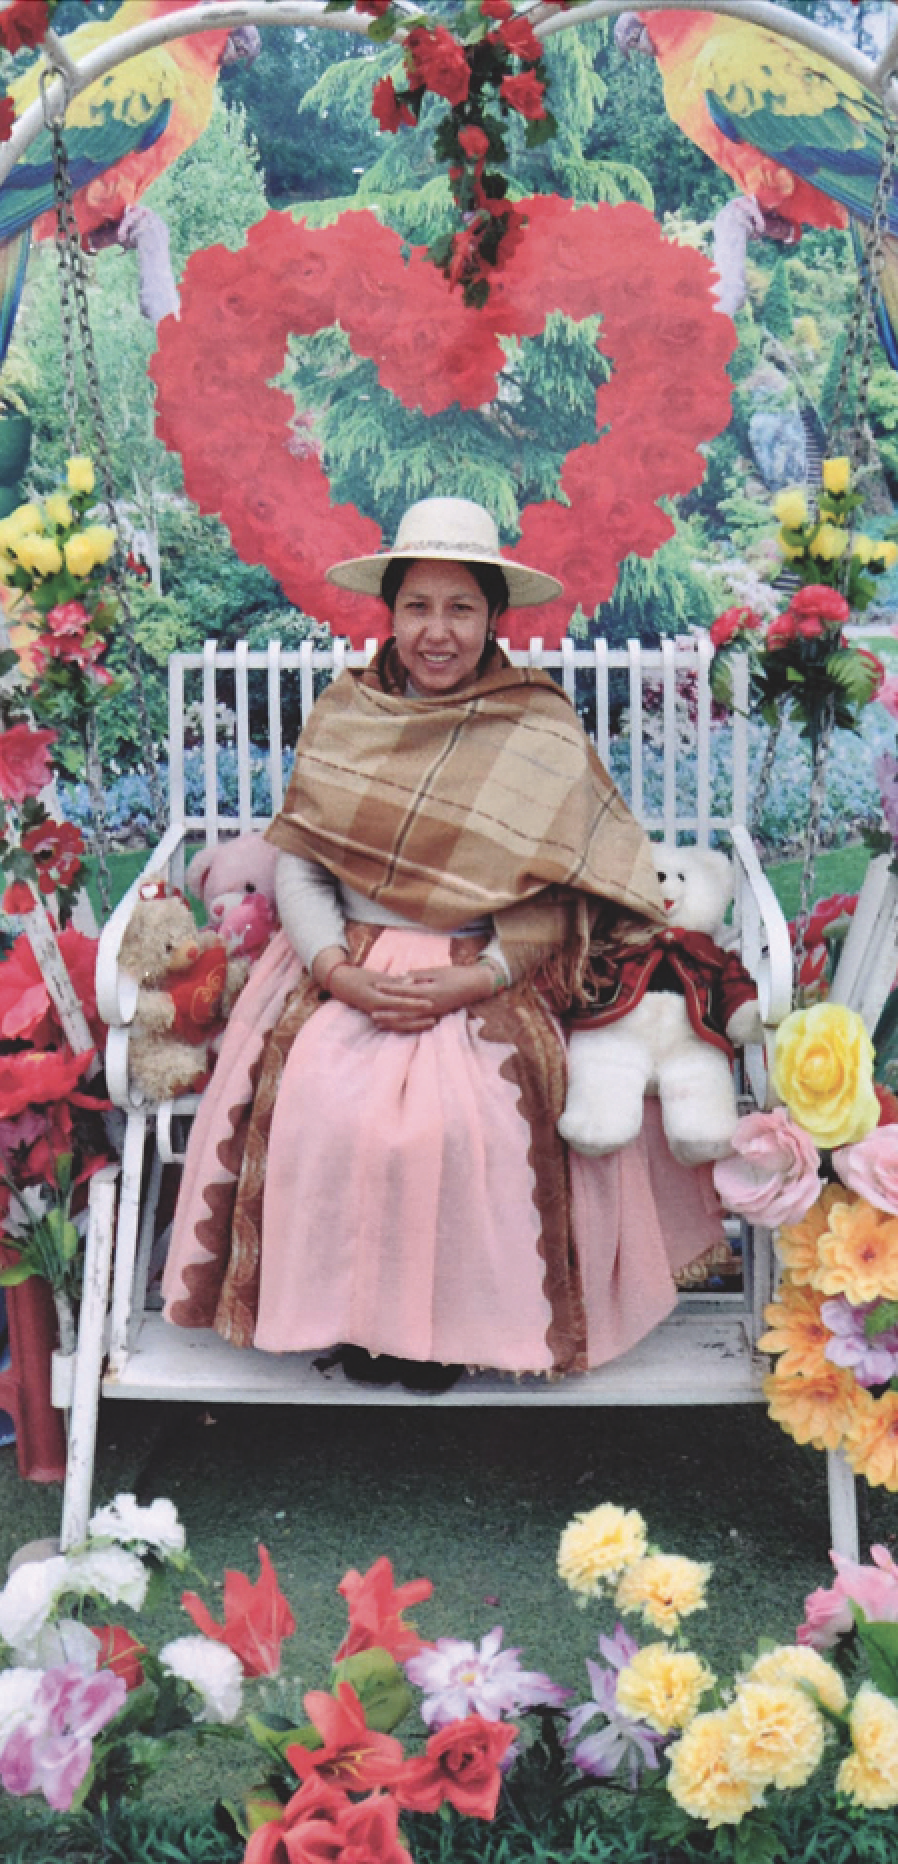 A woman dressed in traditional Andean polleras sits on a white love seta surrounded by three stuffed teddy bears. There are flowers in various places around her, and there is a wall in back with a photograph of a heart made of red roses and large colorful parrots, almost out of the frame. Centered, she smiles. She is wearing an off-white straw hat, a shawl in brown plaid draped across her chest, and a pale pink full-length skirt with brown accents sewn on vertically in two places. Her hands are folded. Her hair is black and gathered behind.